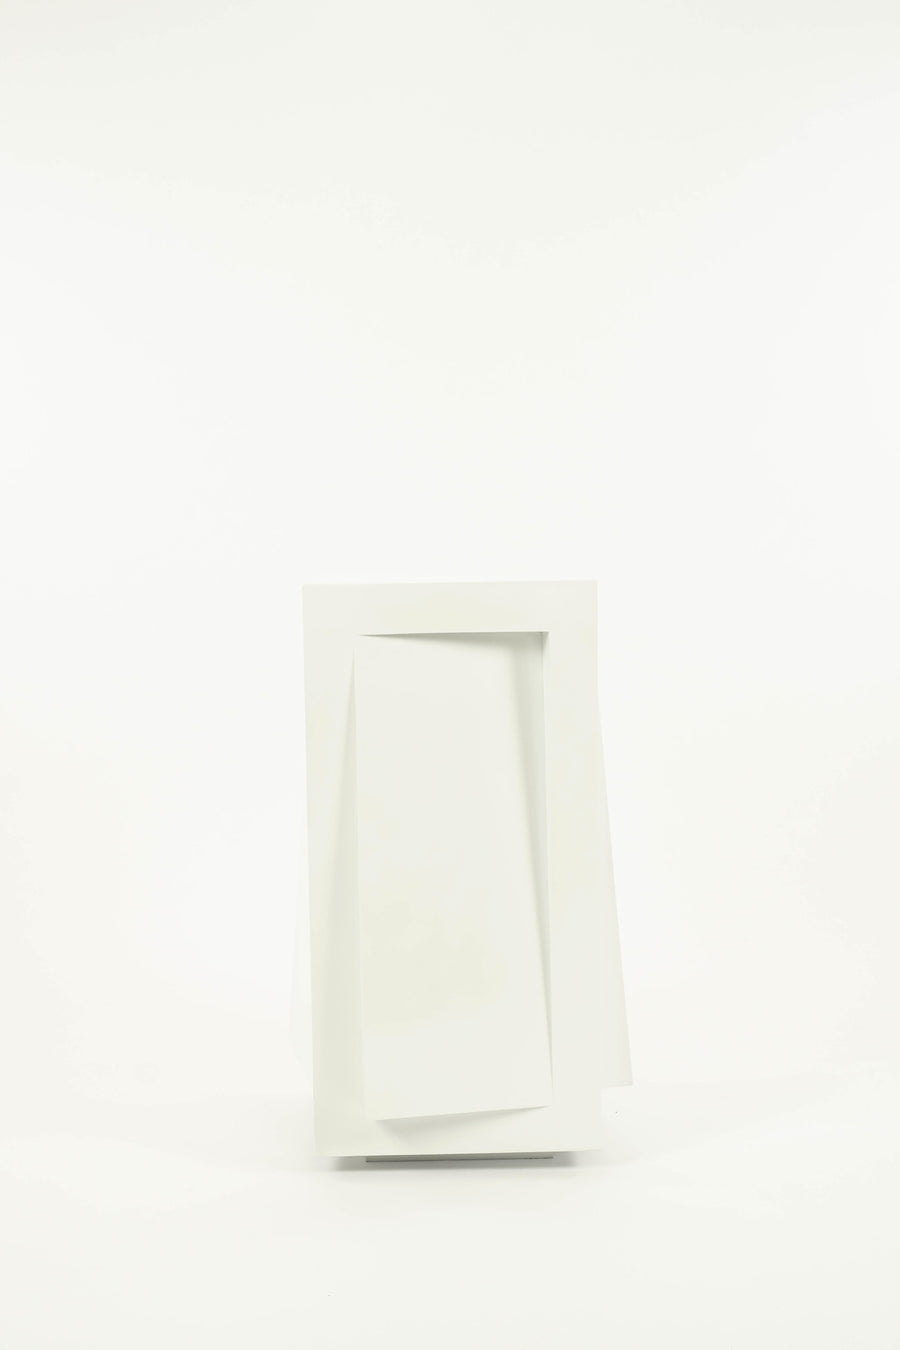 Gerald DiGiusto White In/Out Steel Sculpture